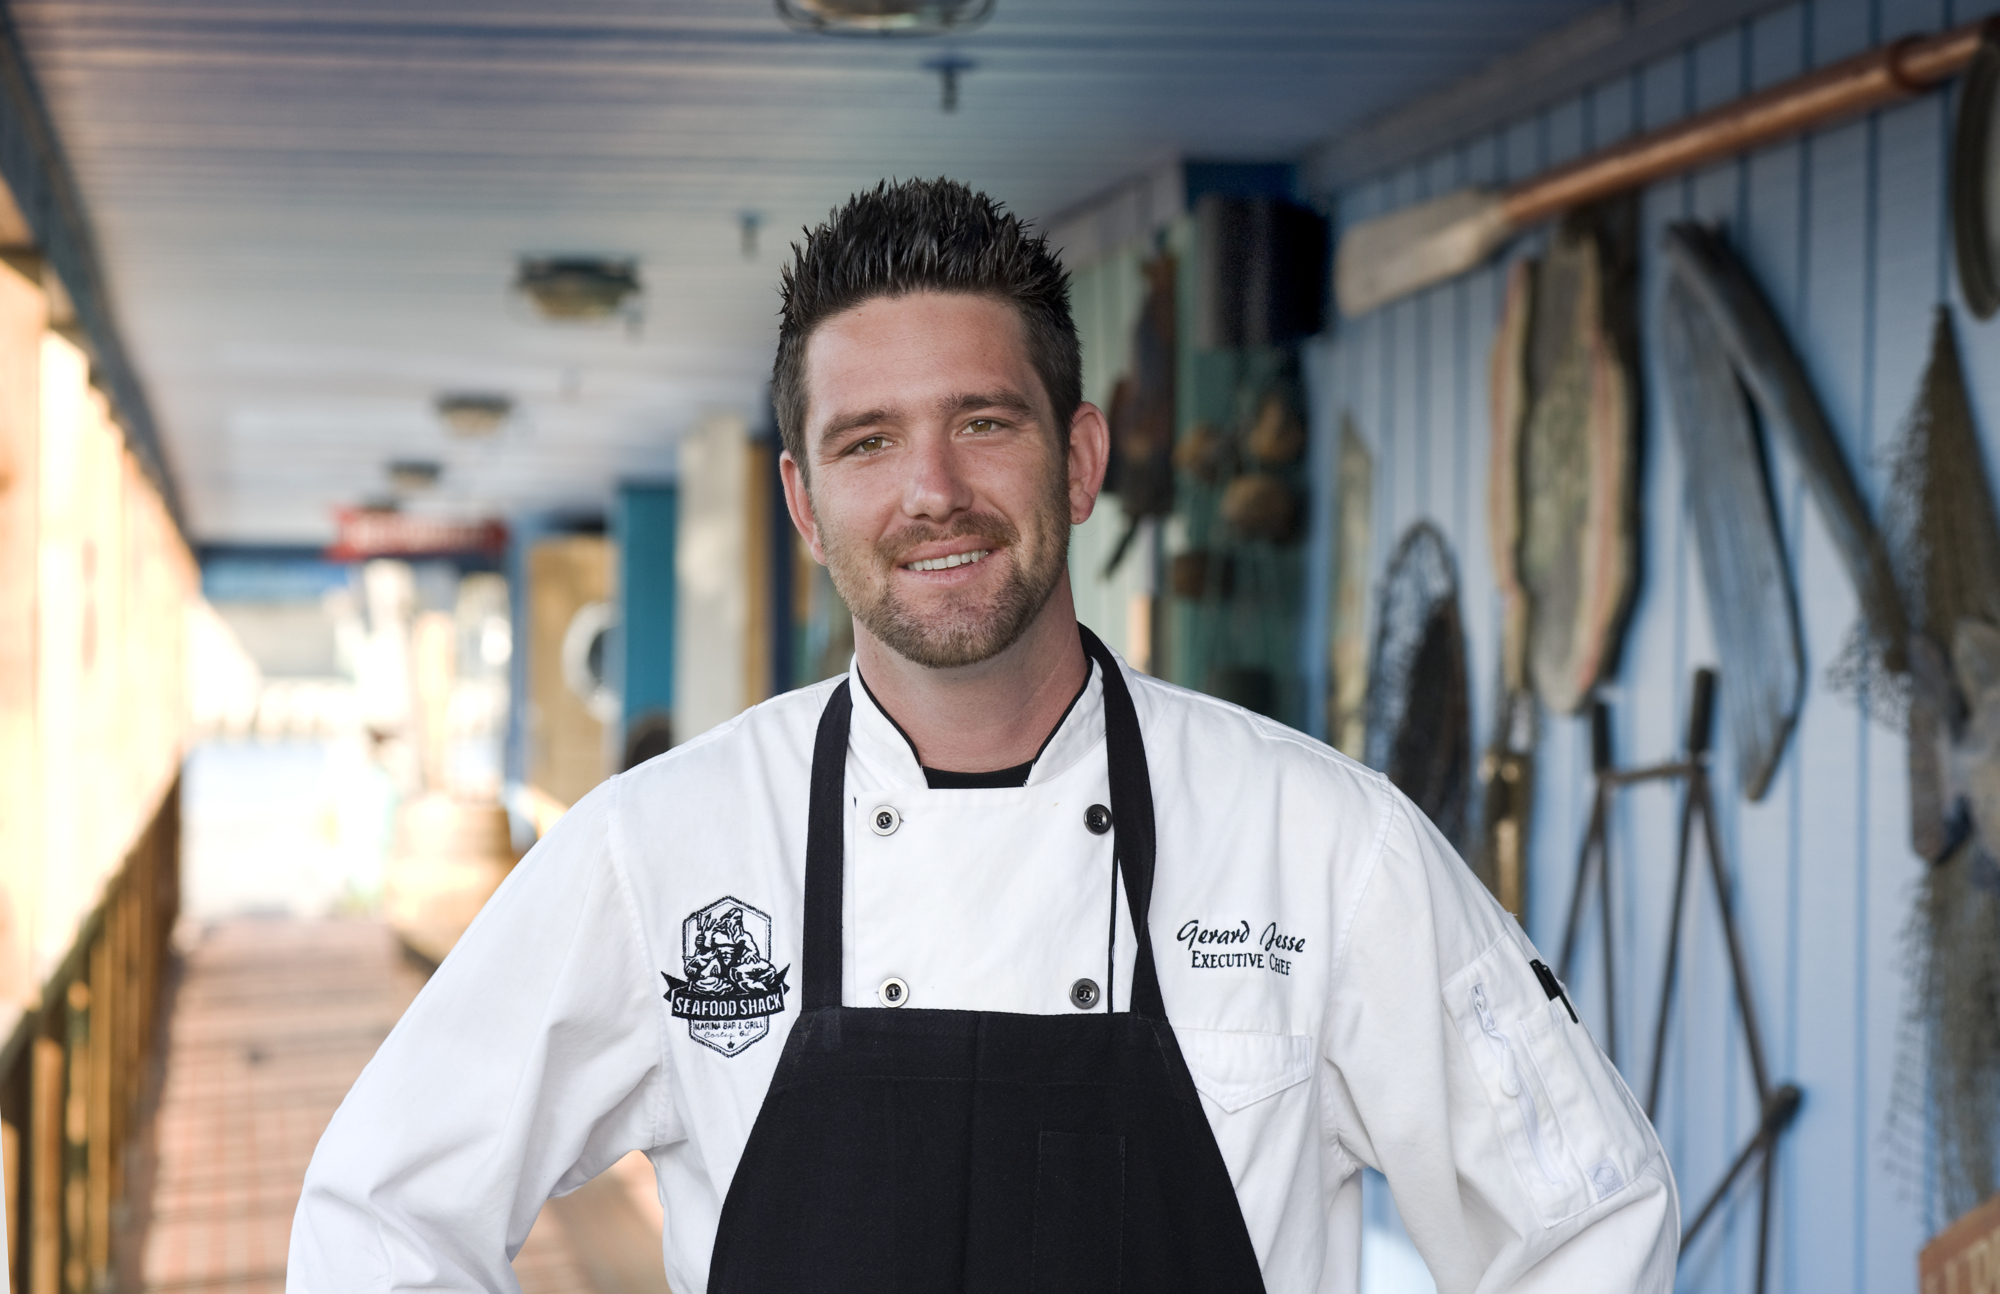 Gerard Jesse, of the Seafood Shack, looks to the future of seafood with concern.